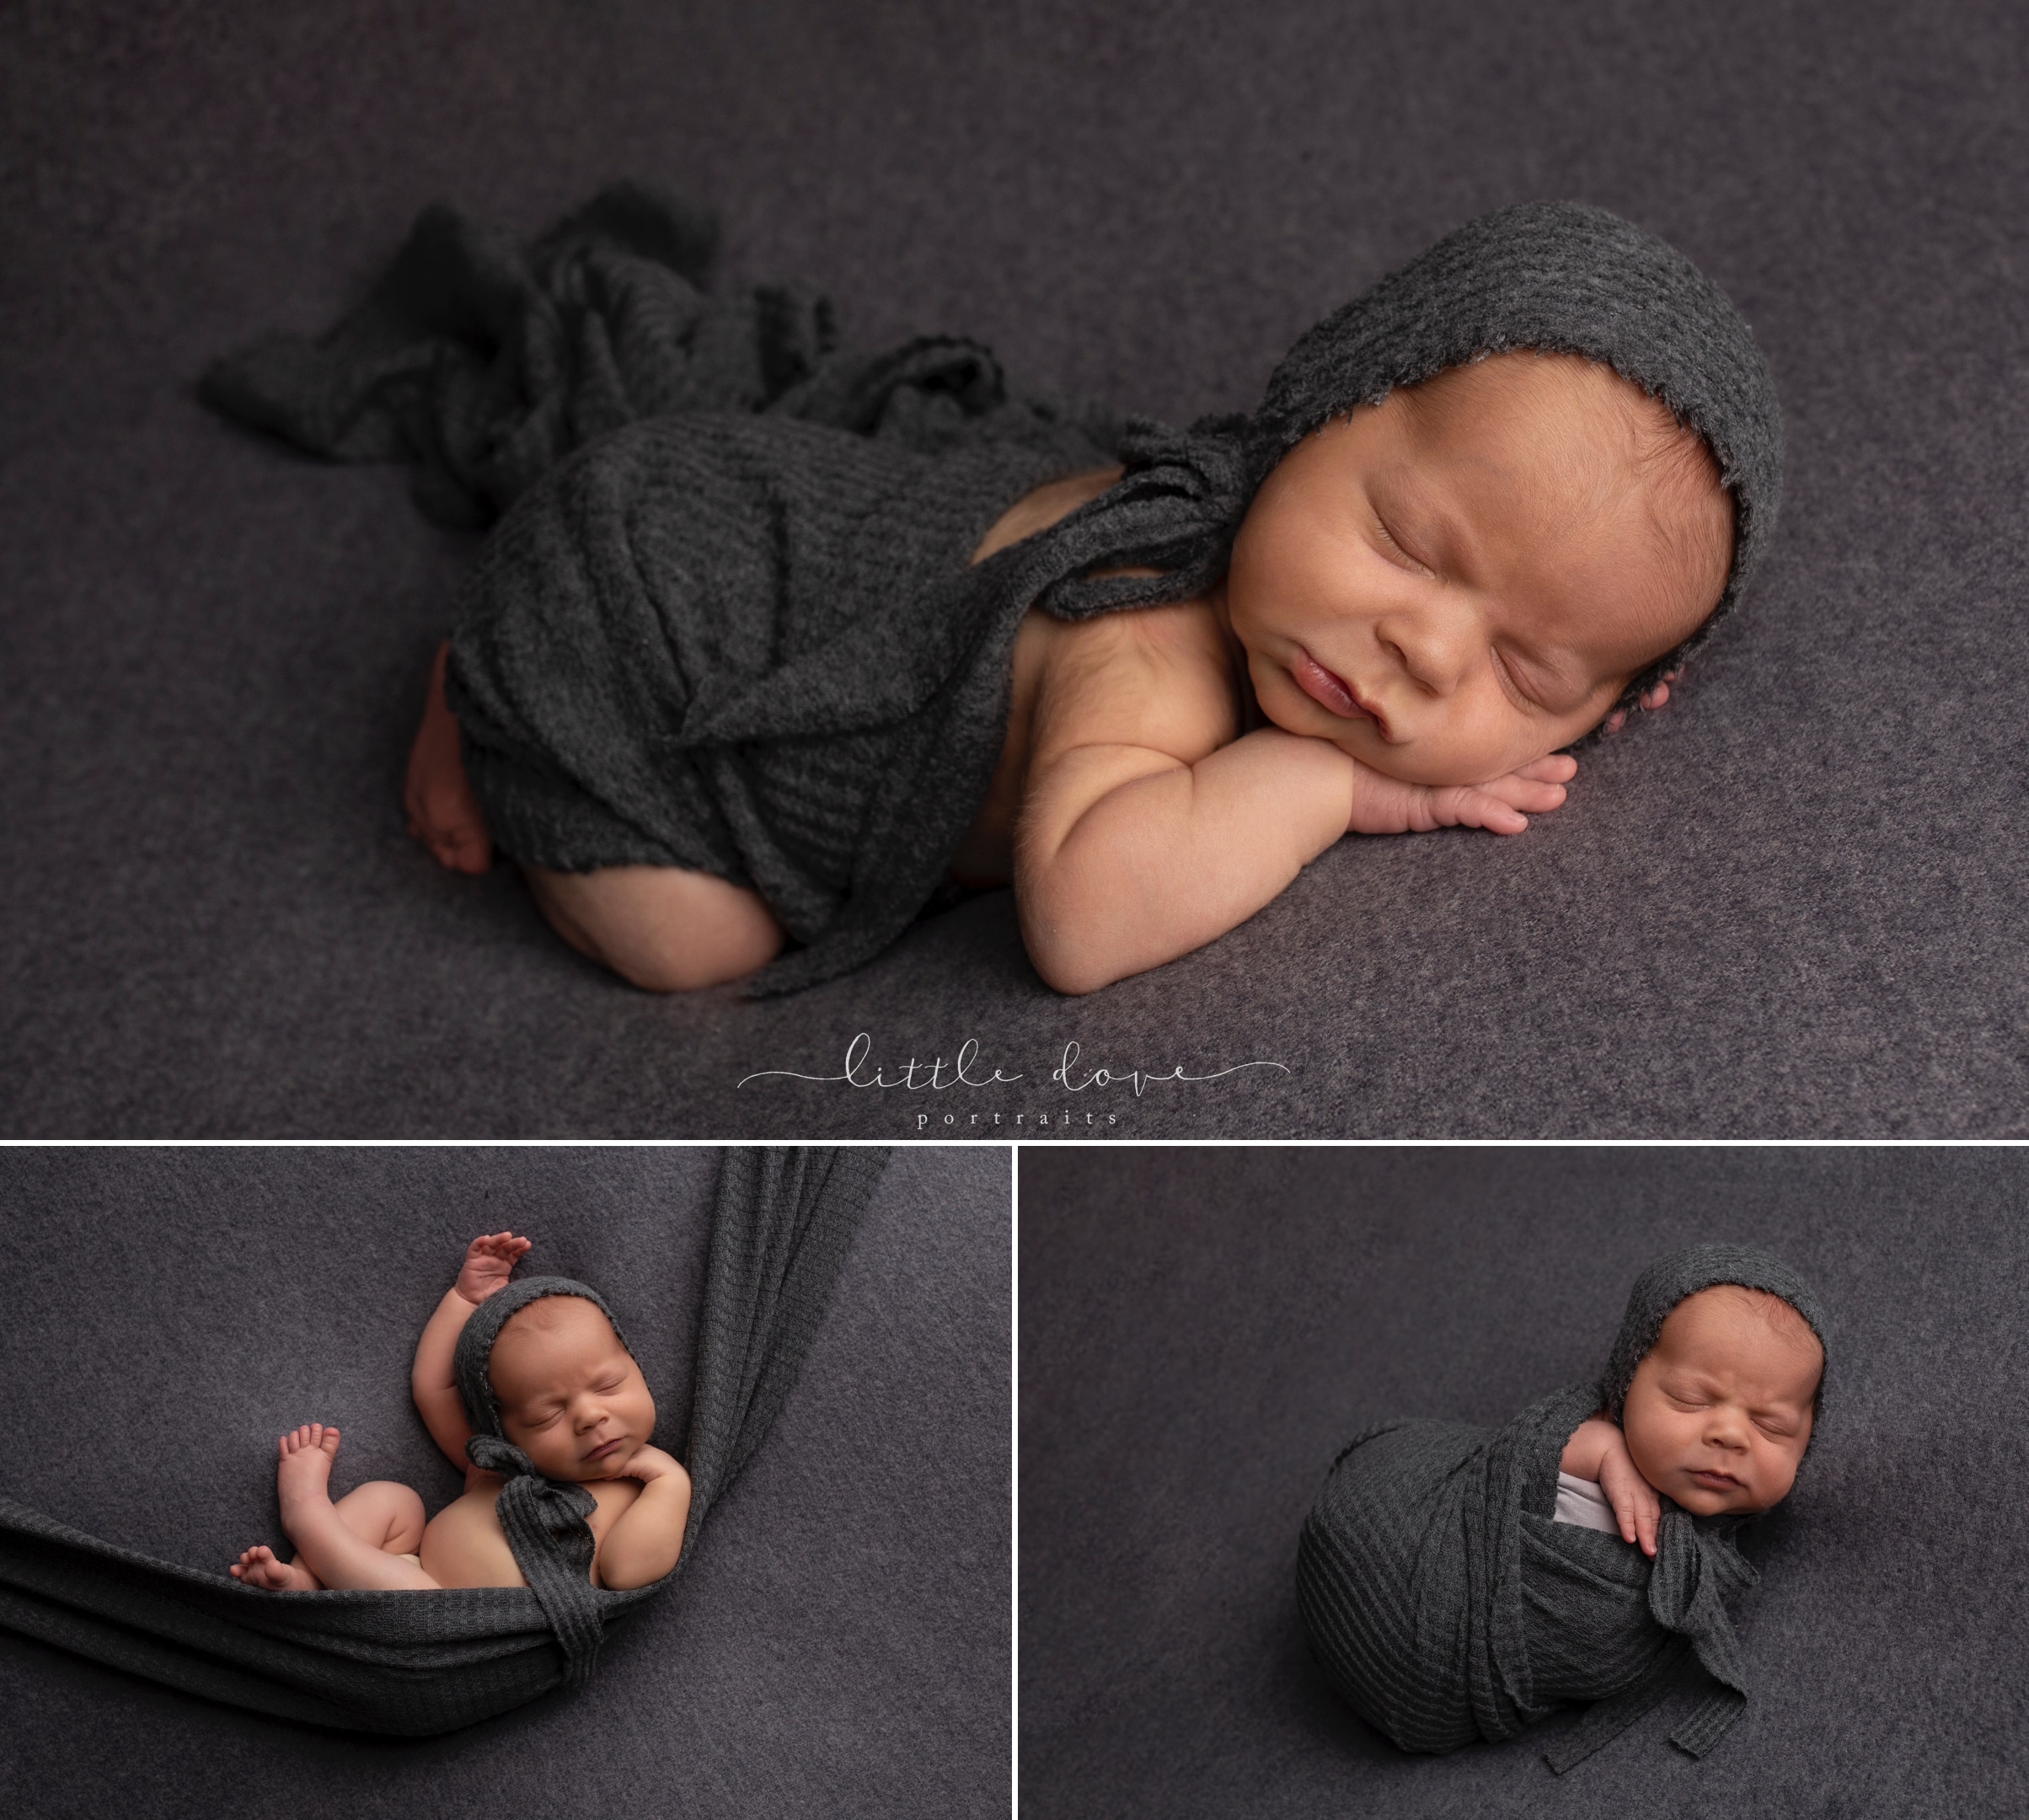 Really cute baby picture ideas | ©Little Dove Portraits http://ldportraits.net